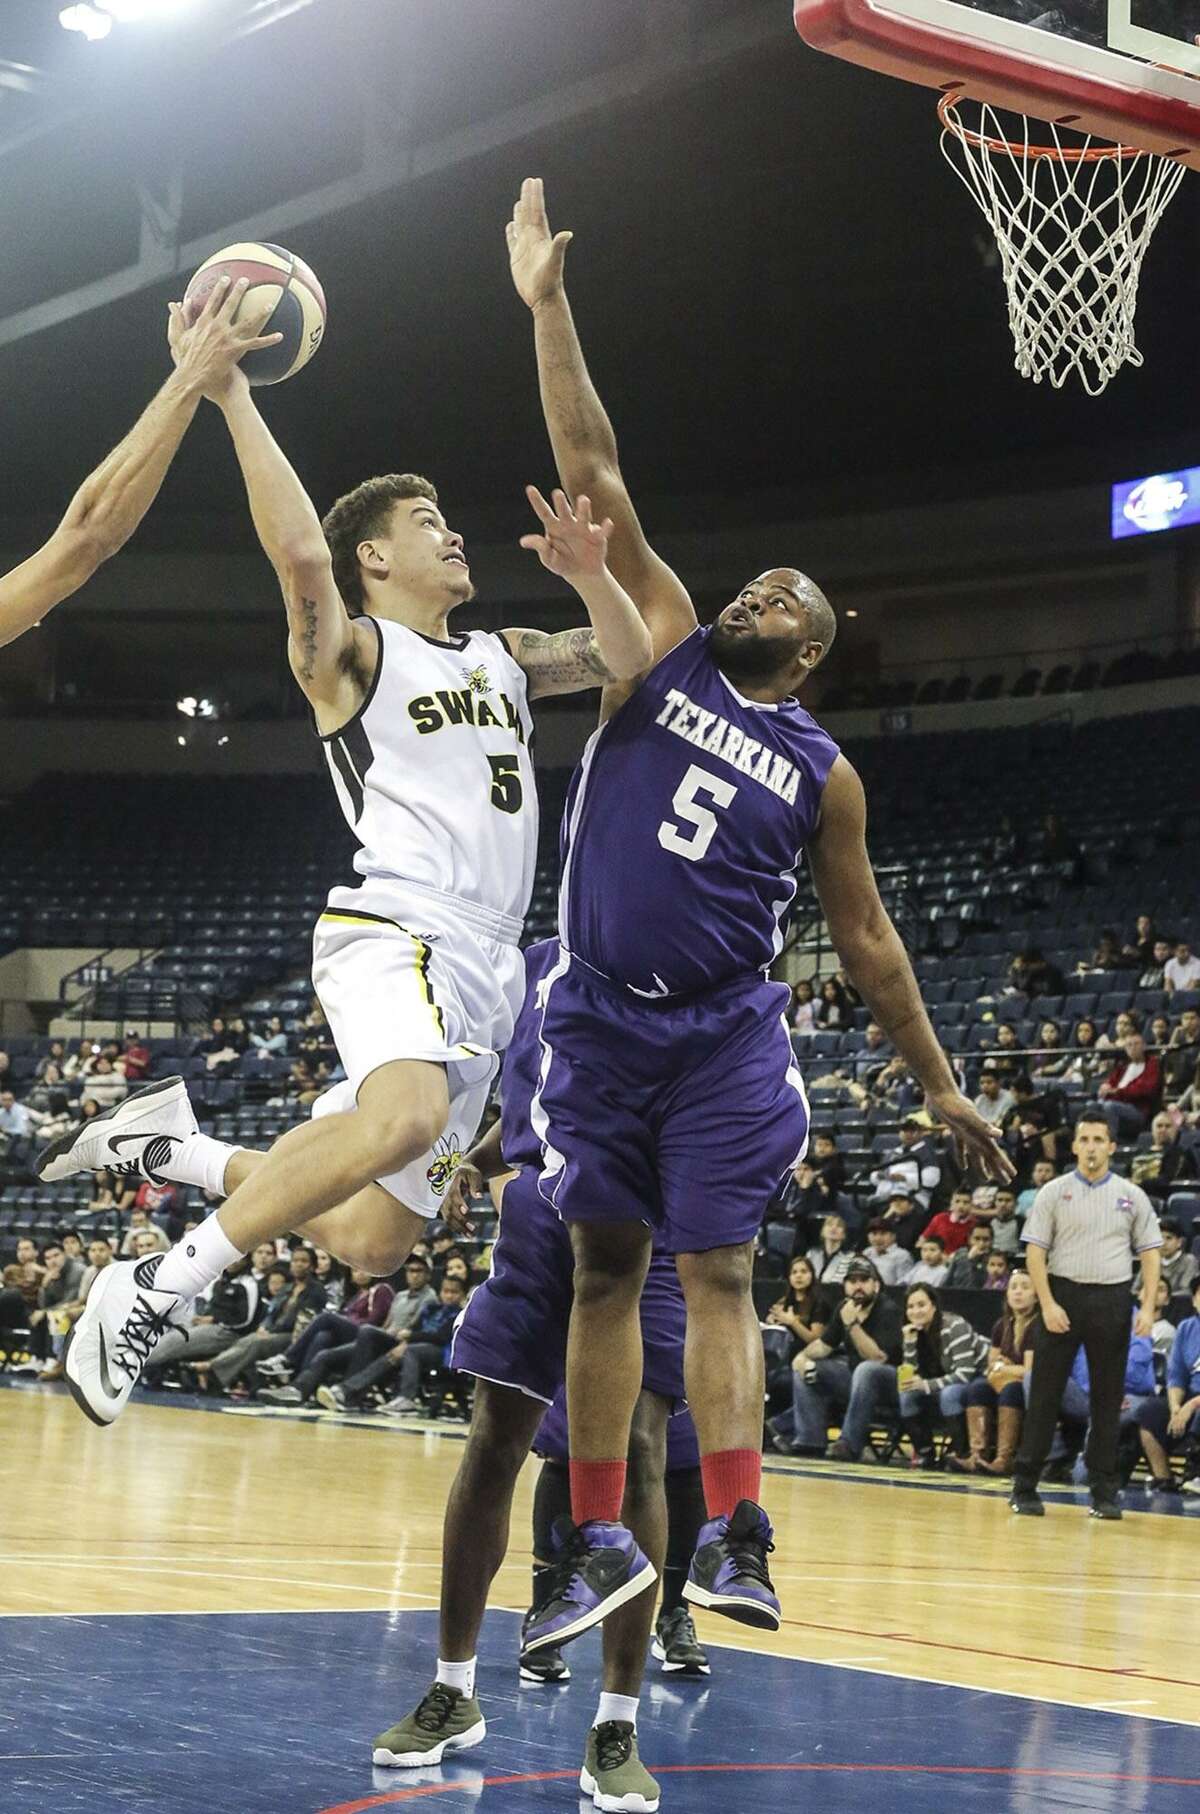 Former Texas A&M International guard Johnel Gray is back for his second season with the Swarm after picking up three triple-doubles last season — all coming within the last five regular-season games.